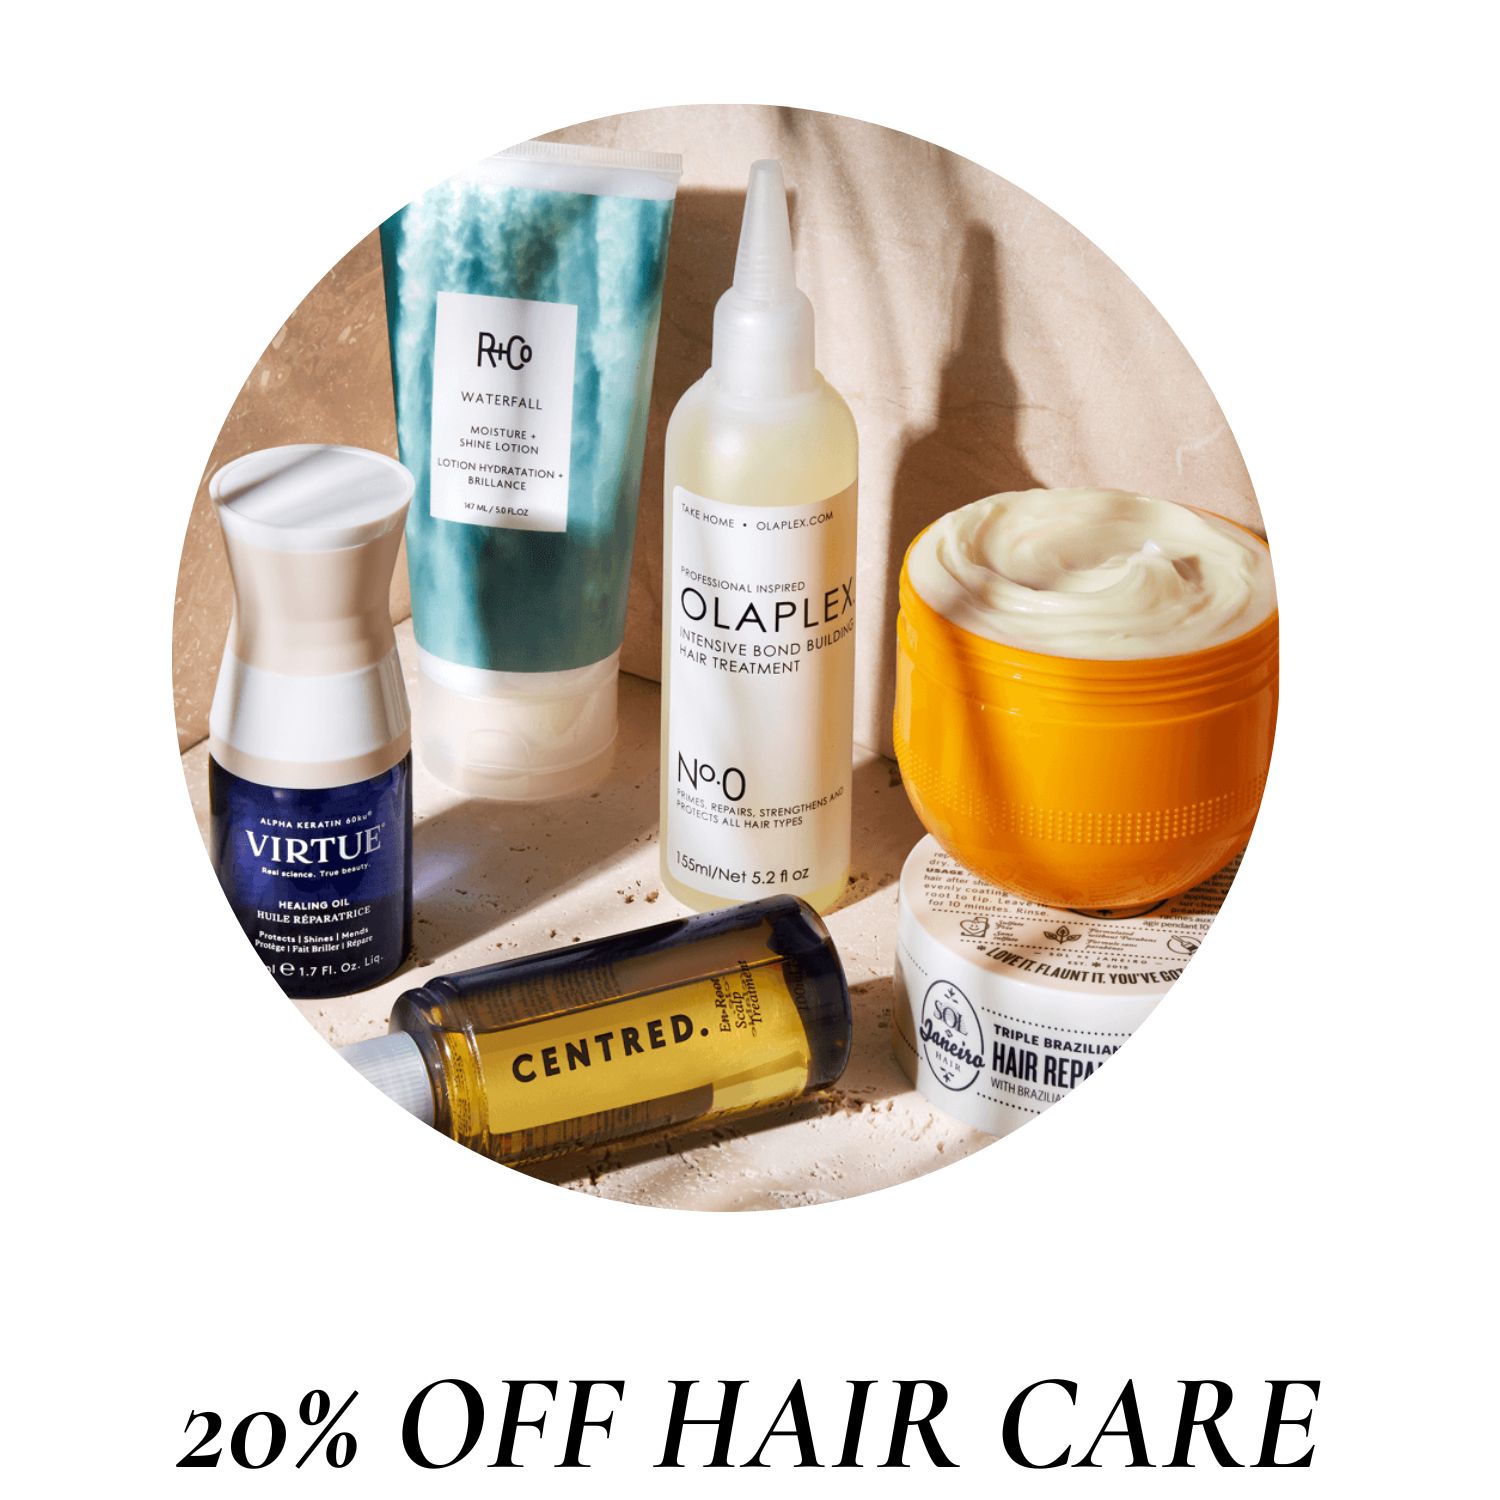 20% off hair care